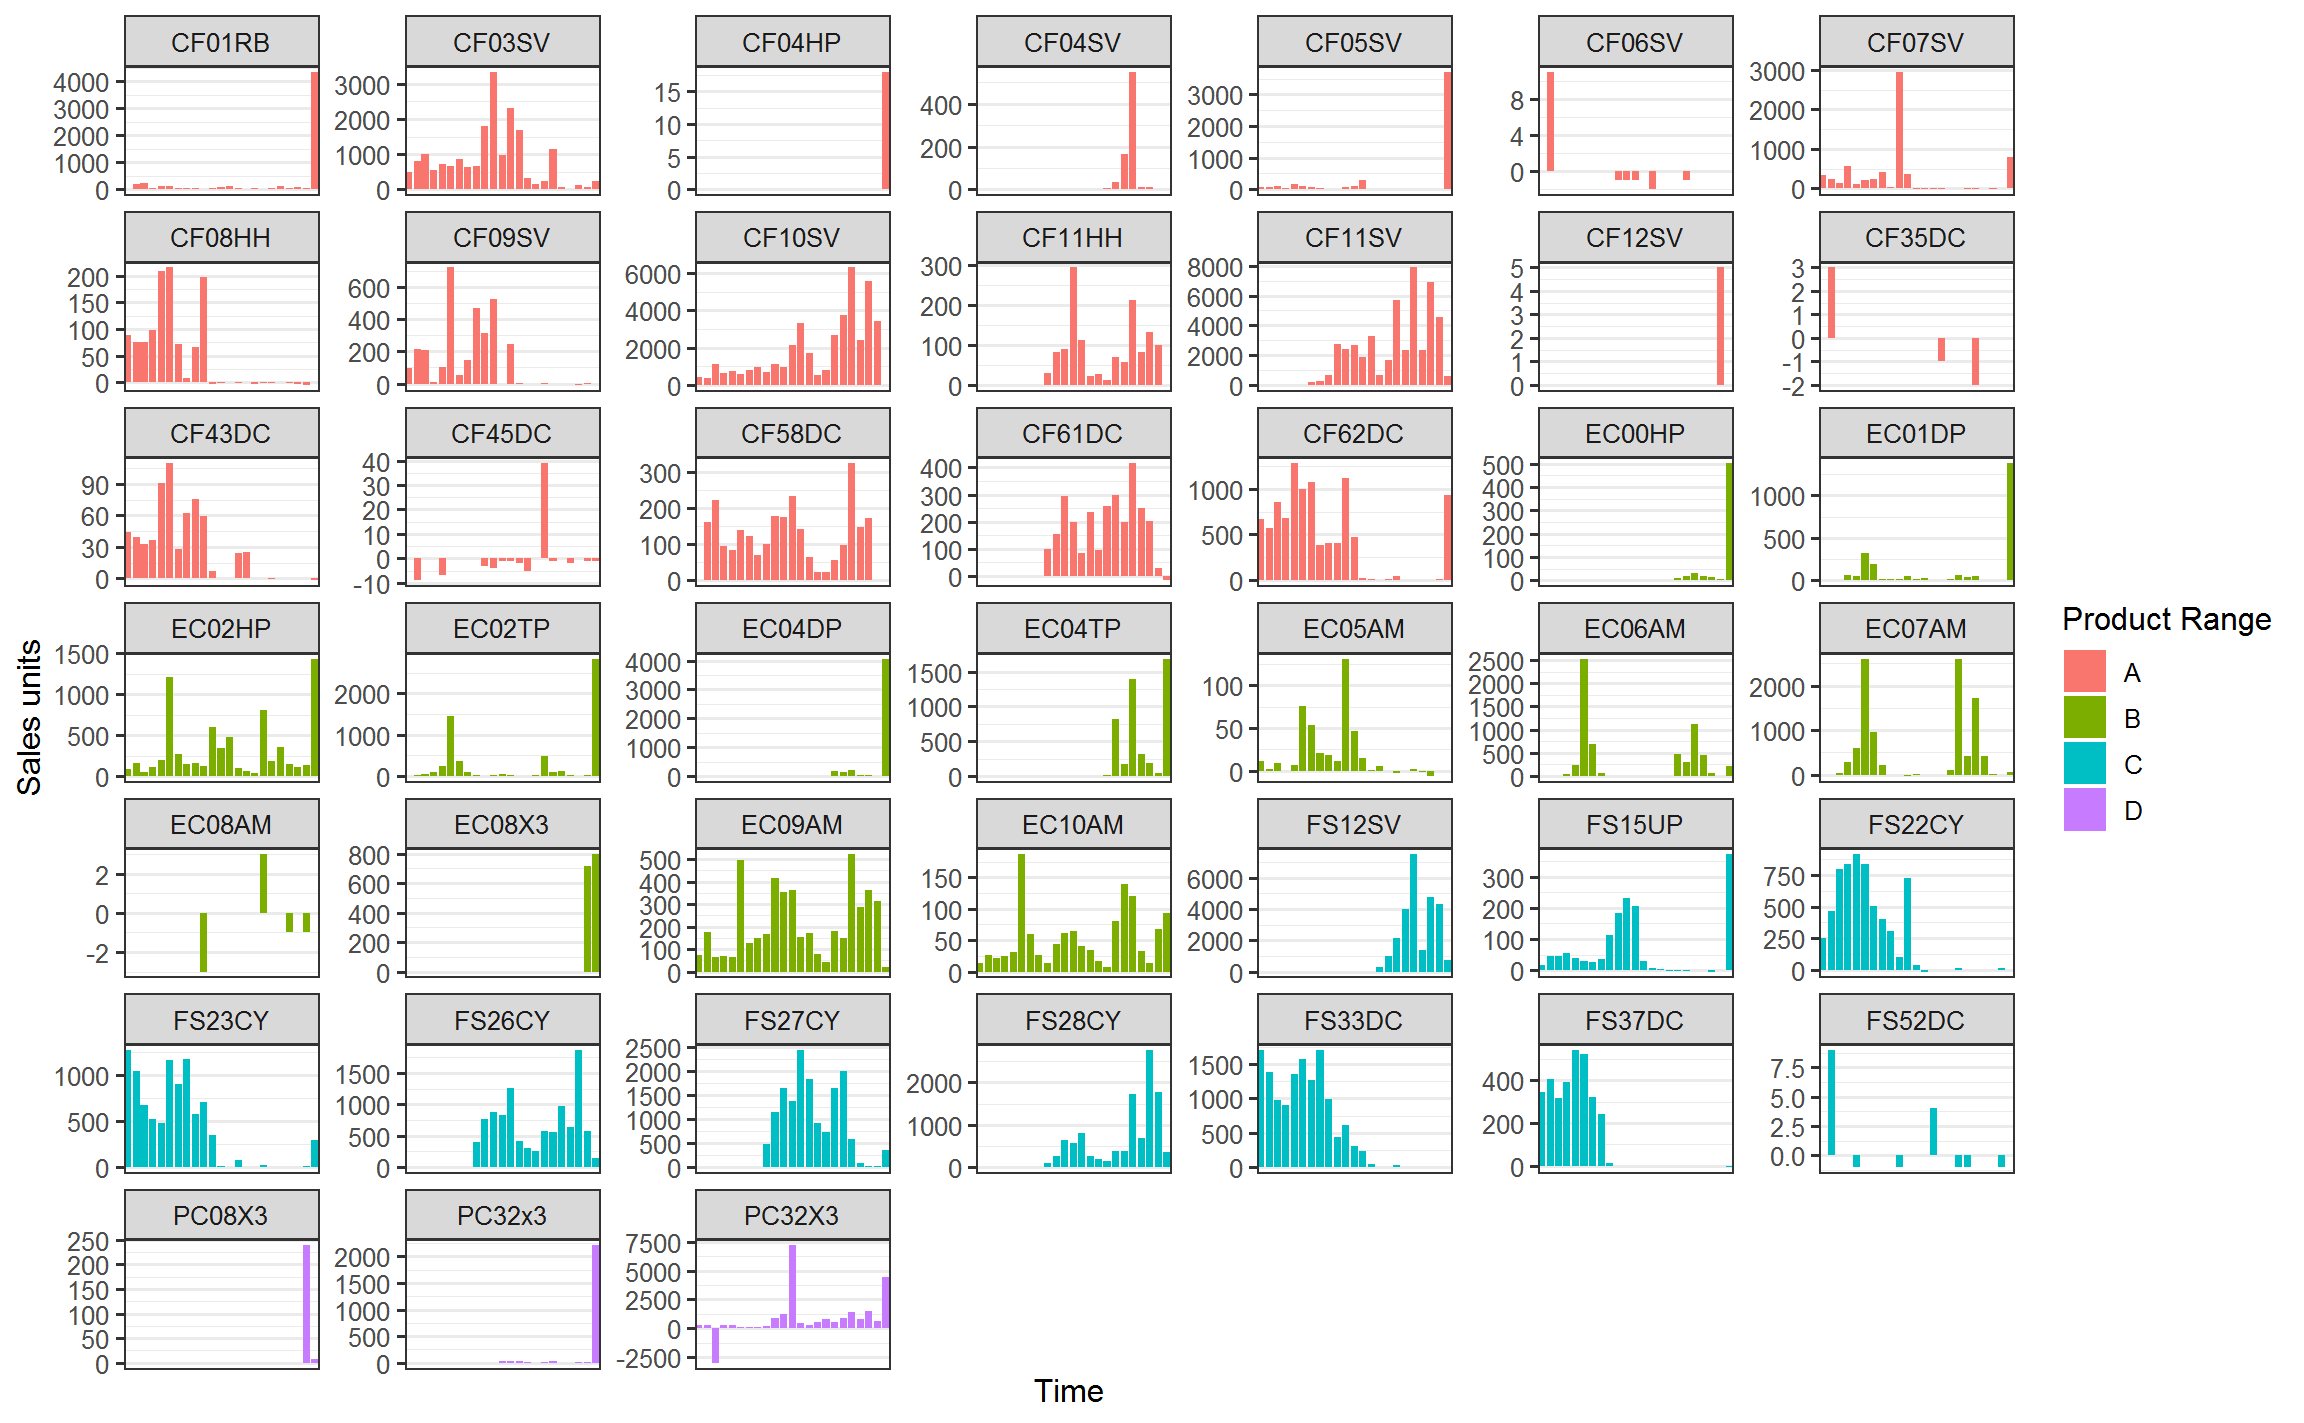 Random plots for different products showing rather different patterns